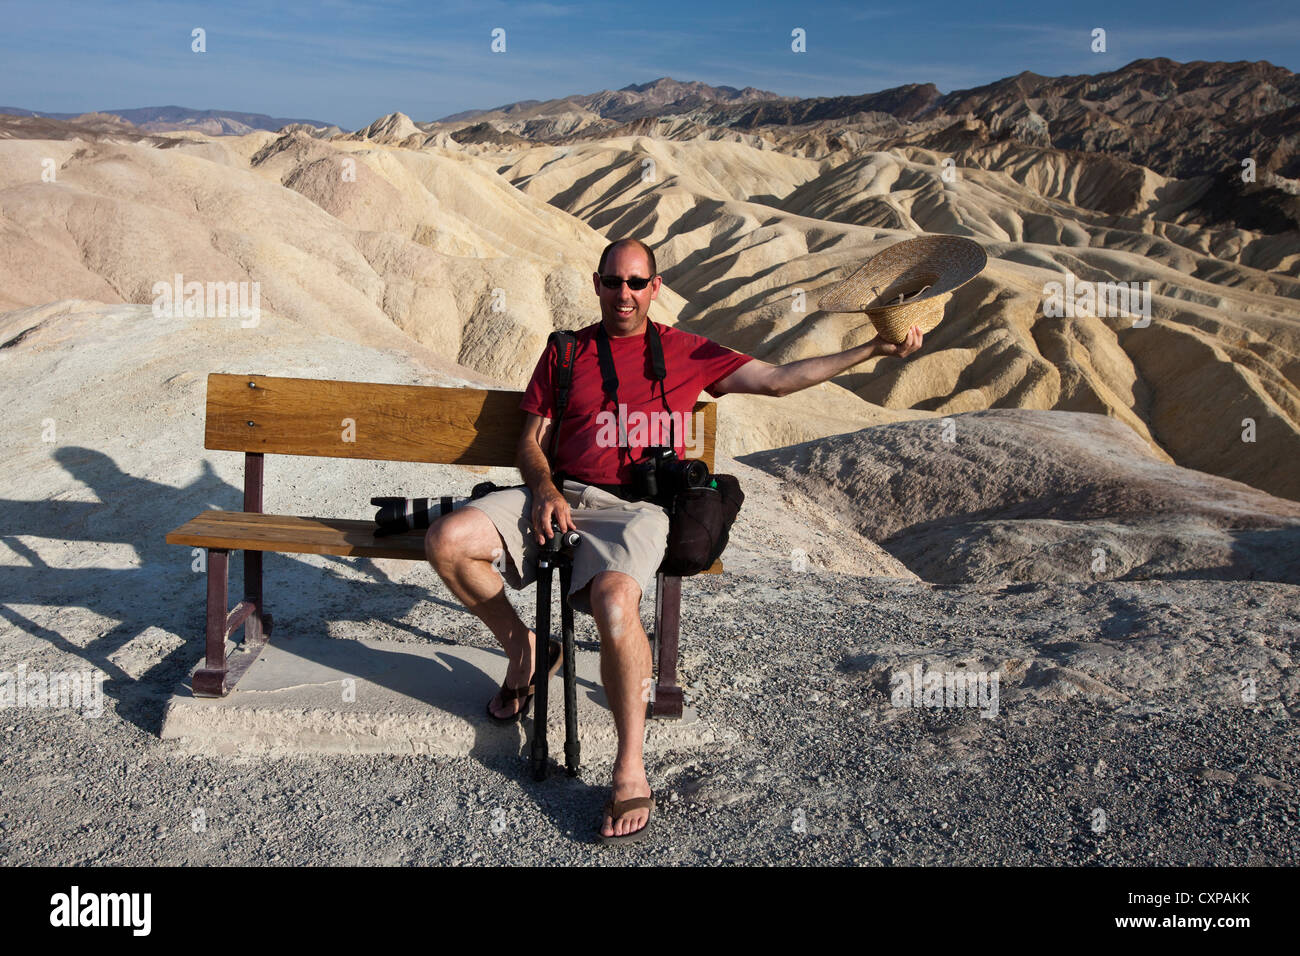 Adult male sits on park bench in front badlands Zabriskie Point Death Valley National Park California United States America Stock Photo